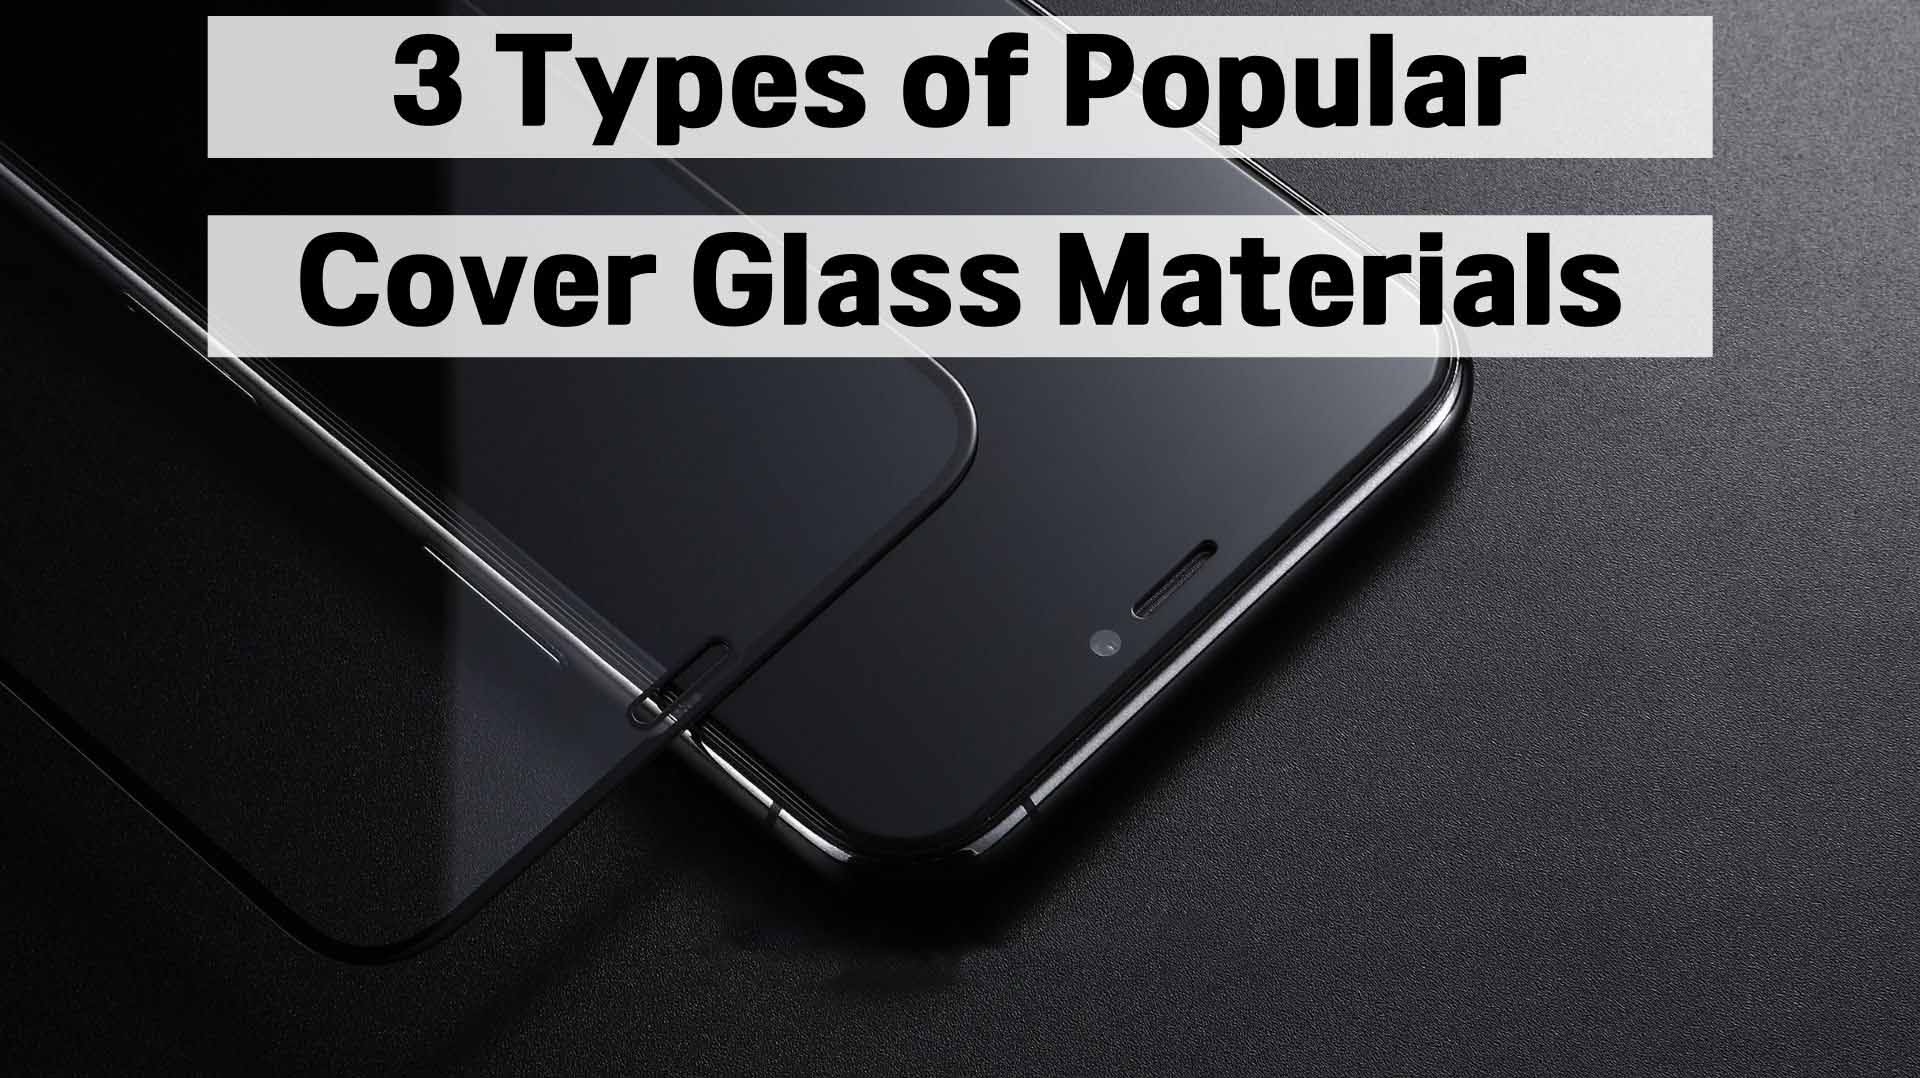 3 Types of Popular Cover Glass Materials